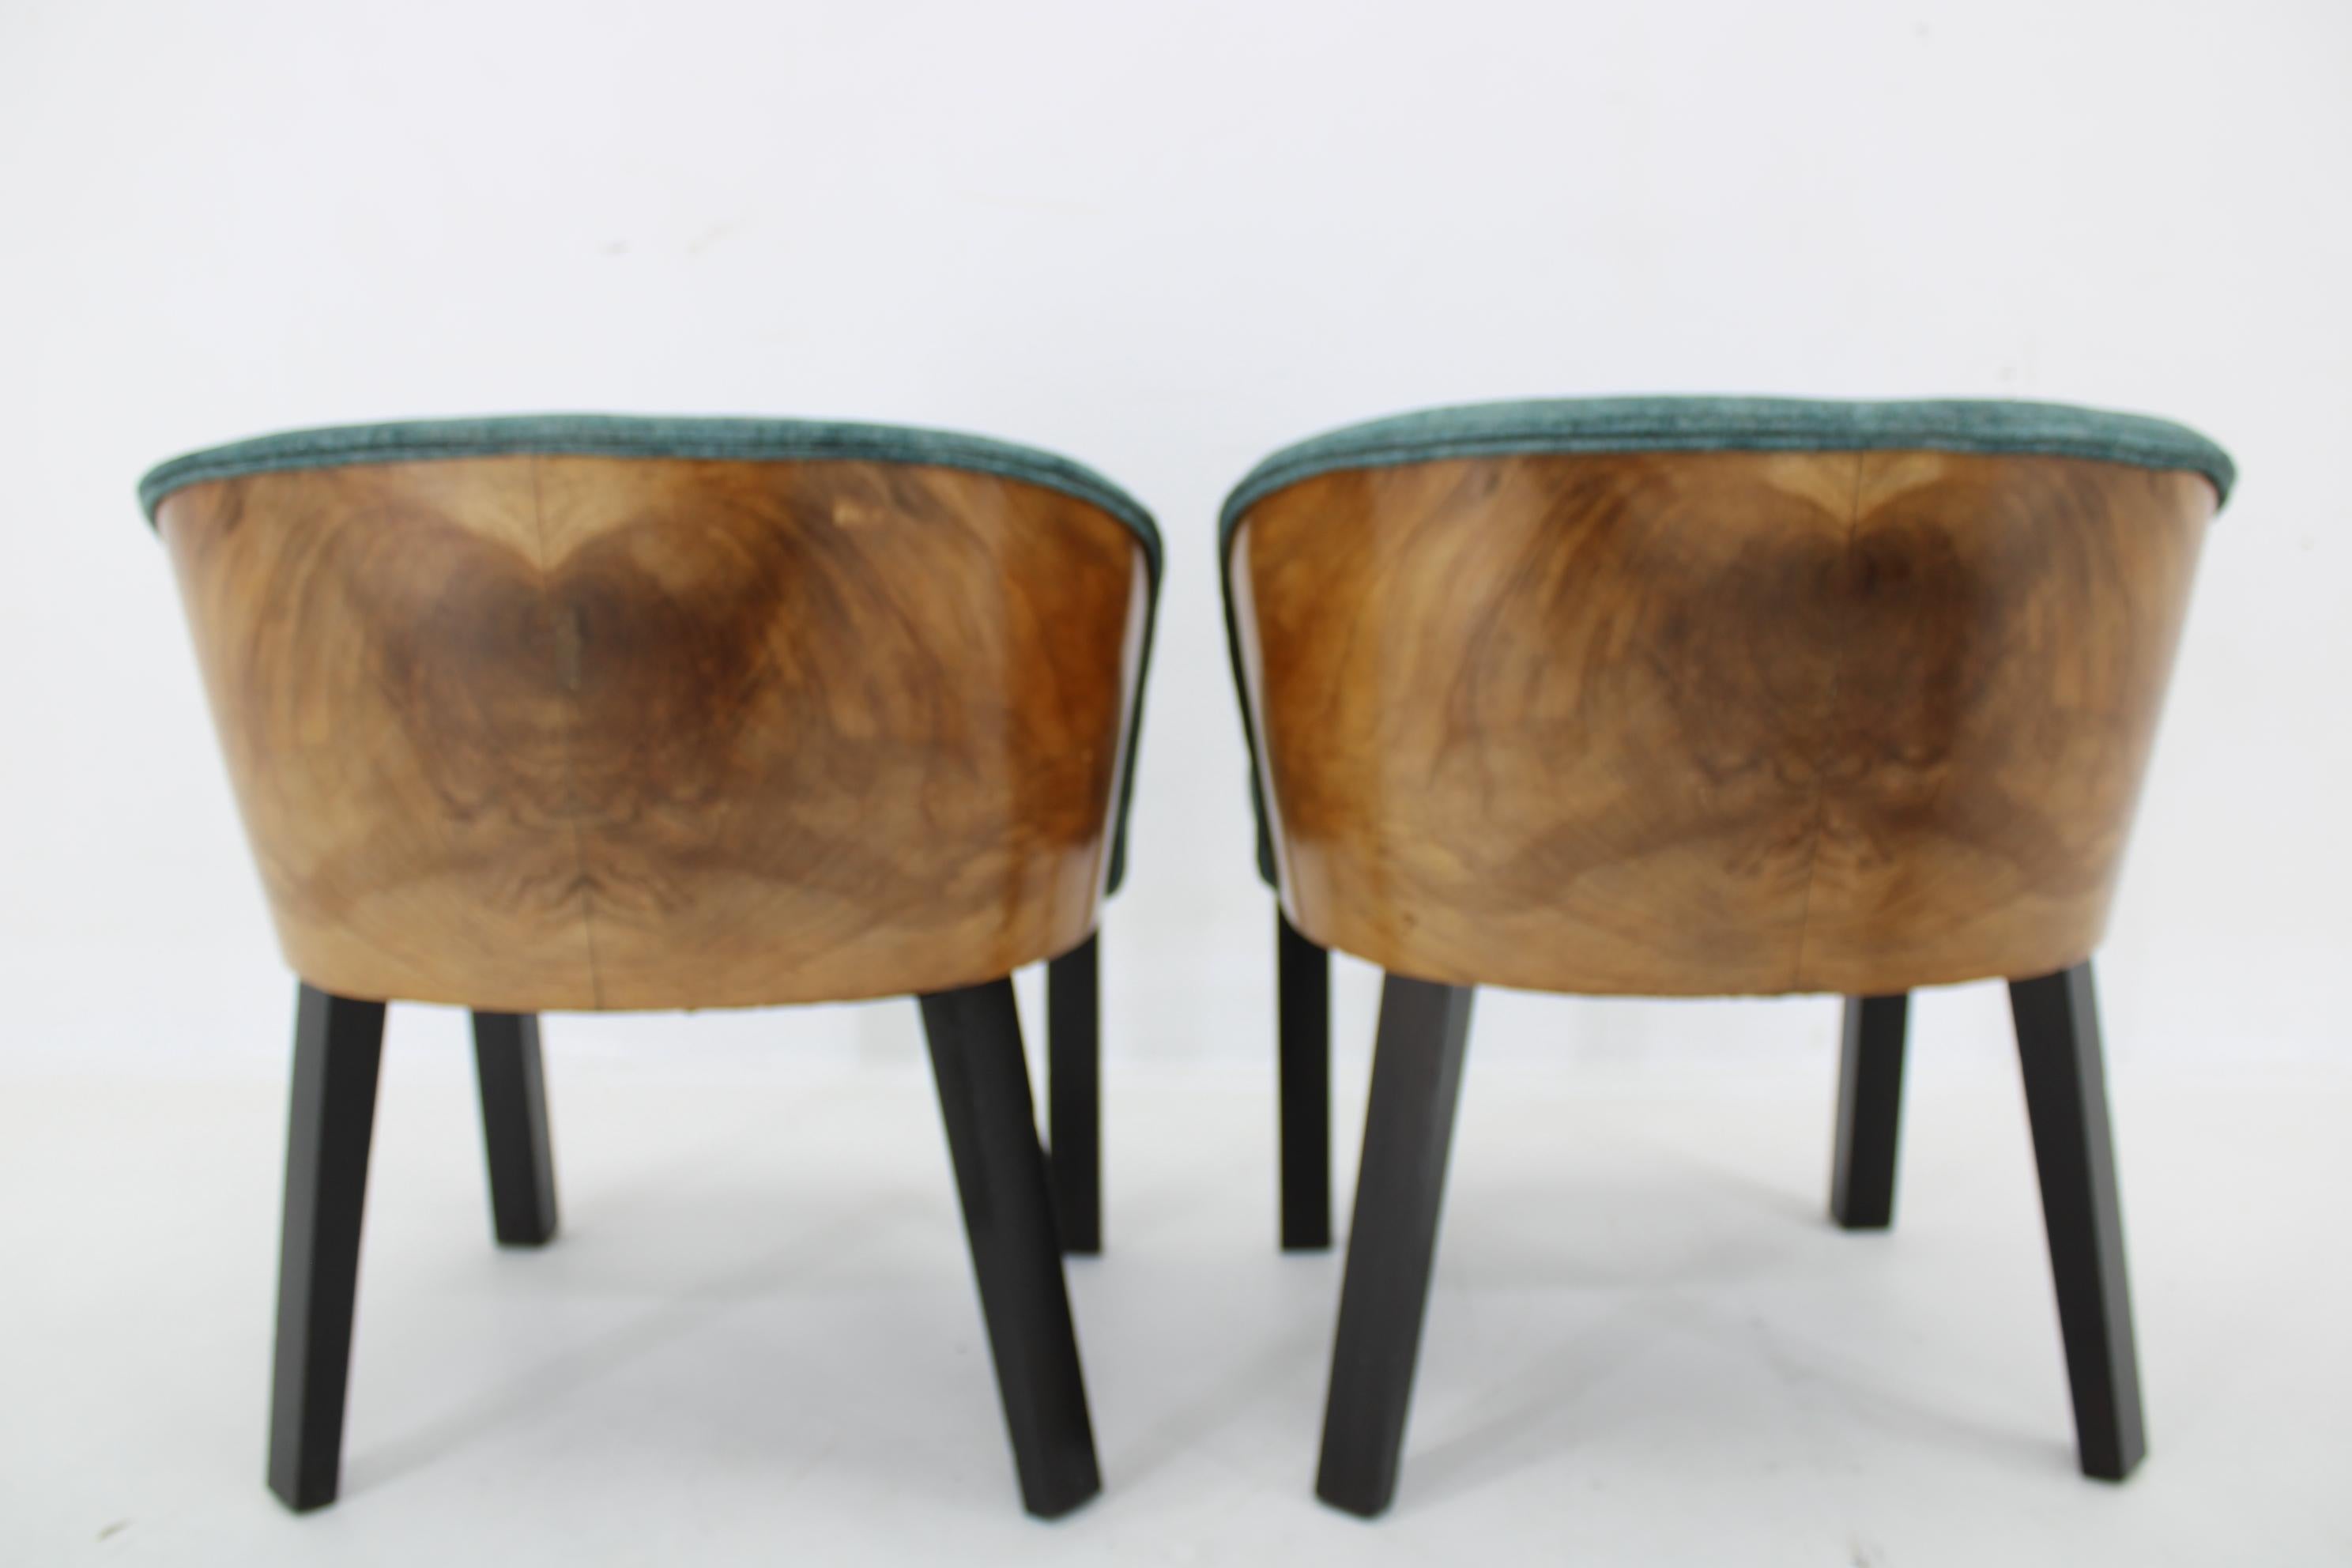 1940s Pair of Chairs with Stool, Italy For Sale 5